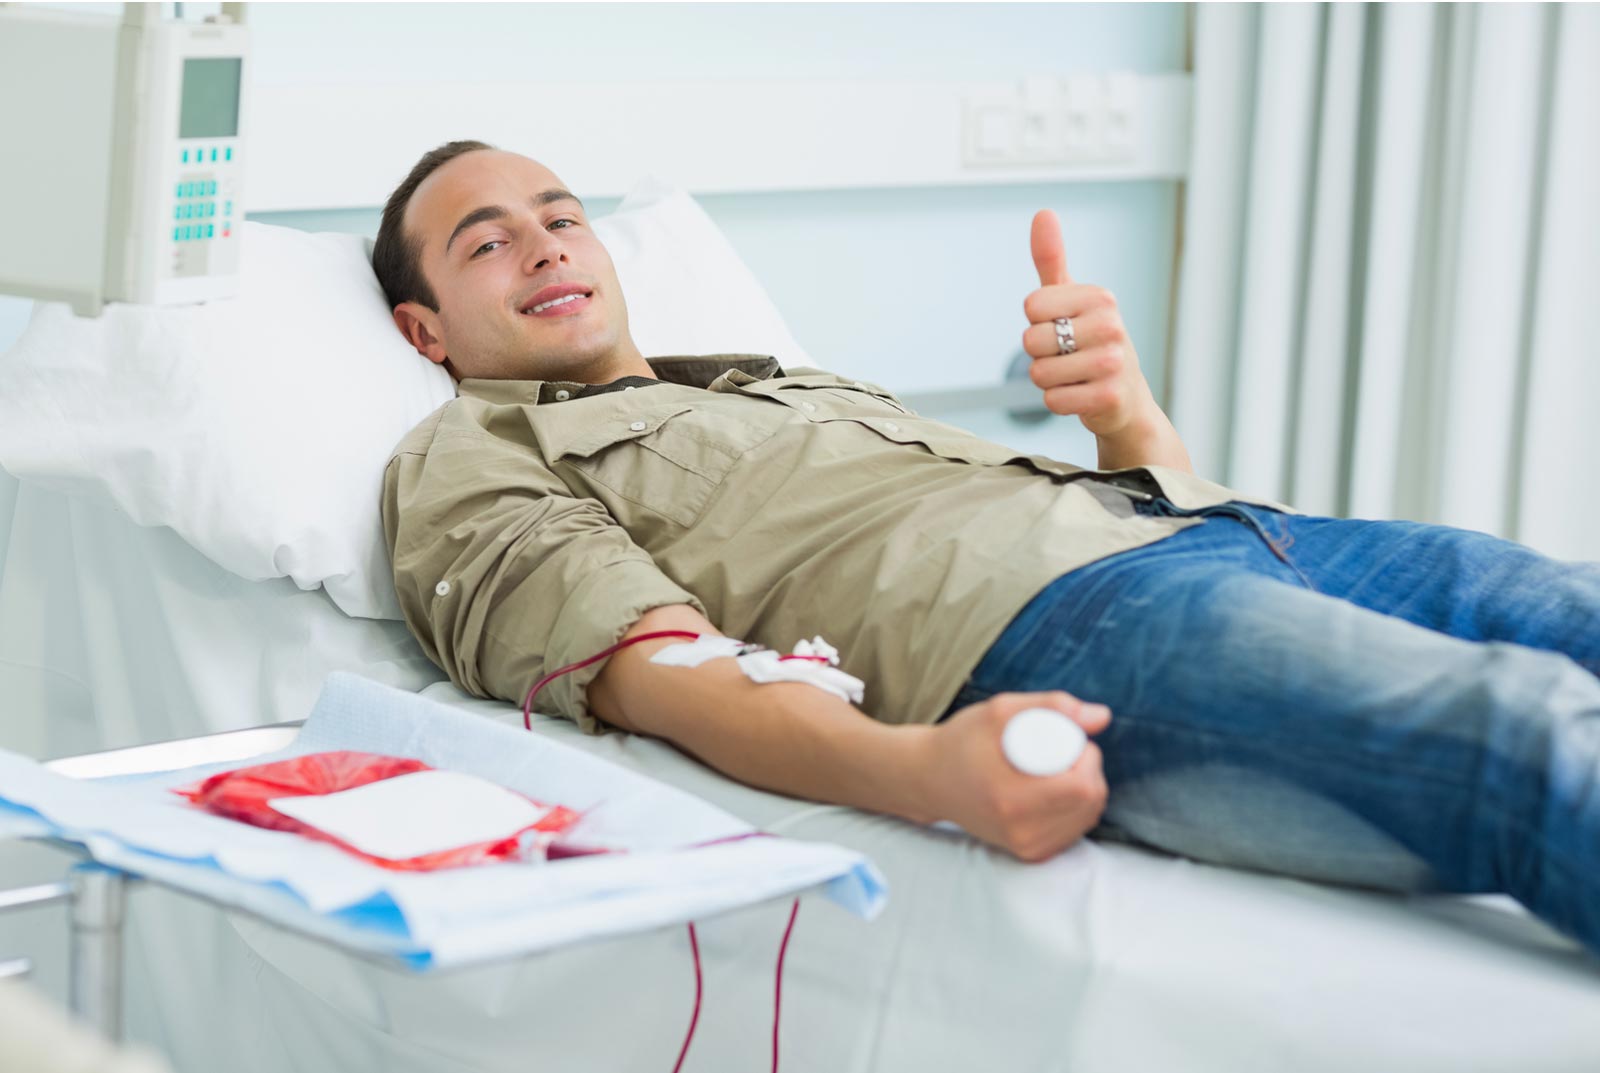 Can You Donate Blood while Fasting?